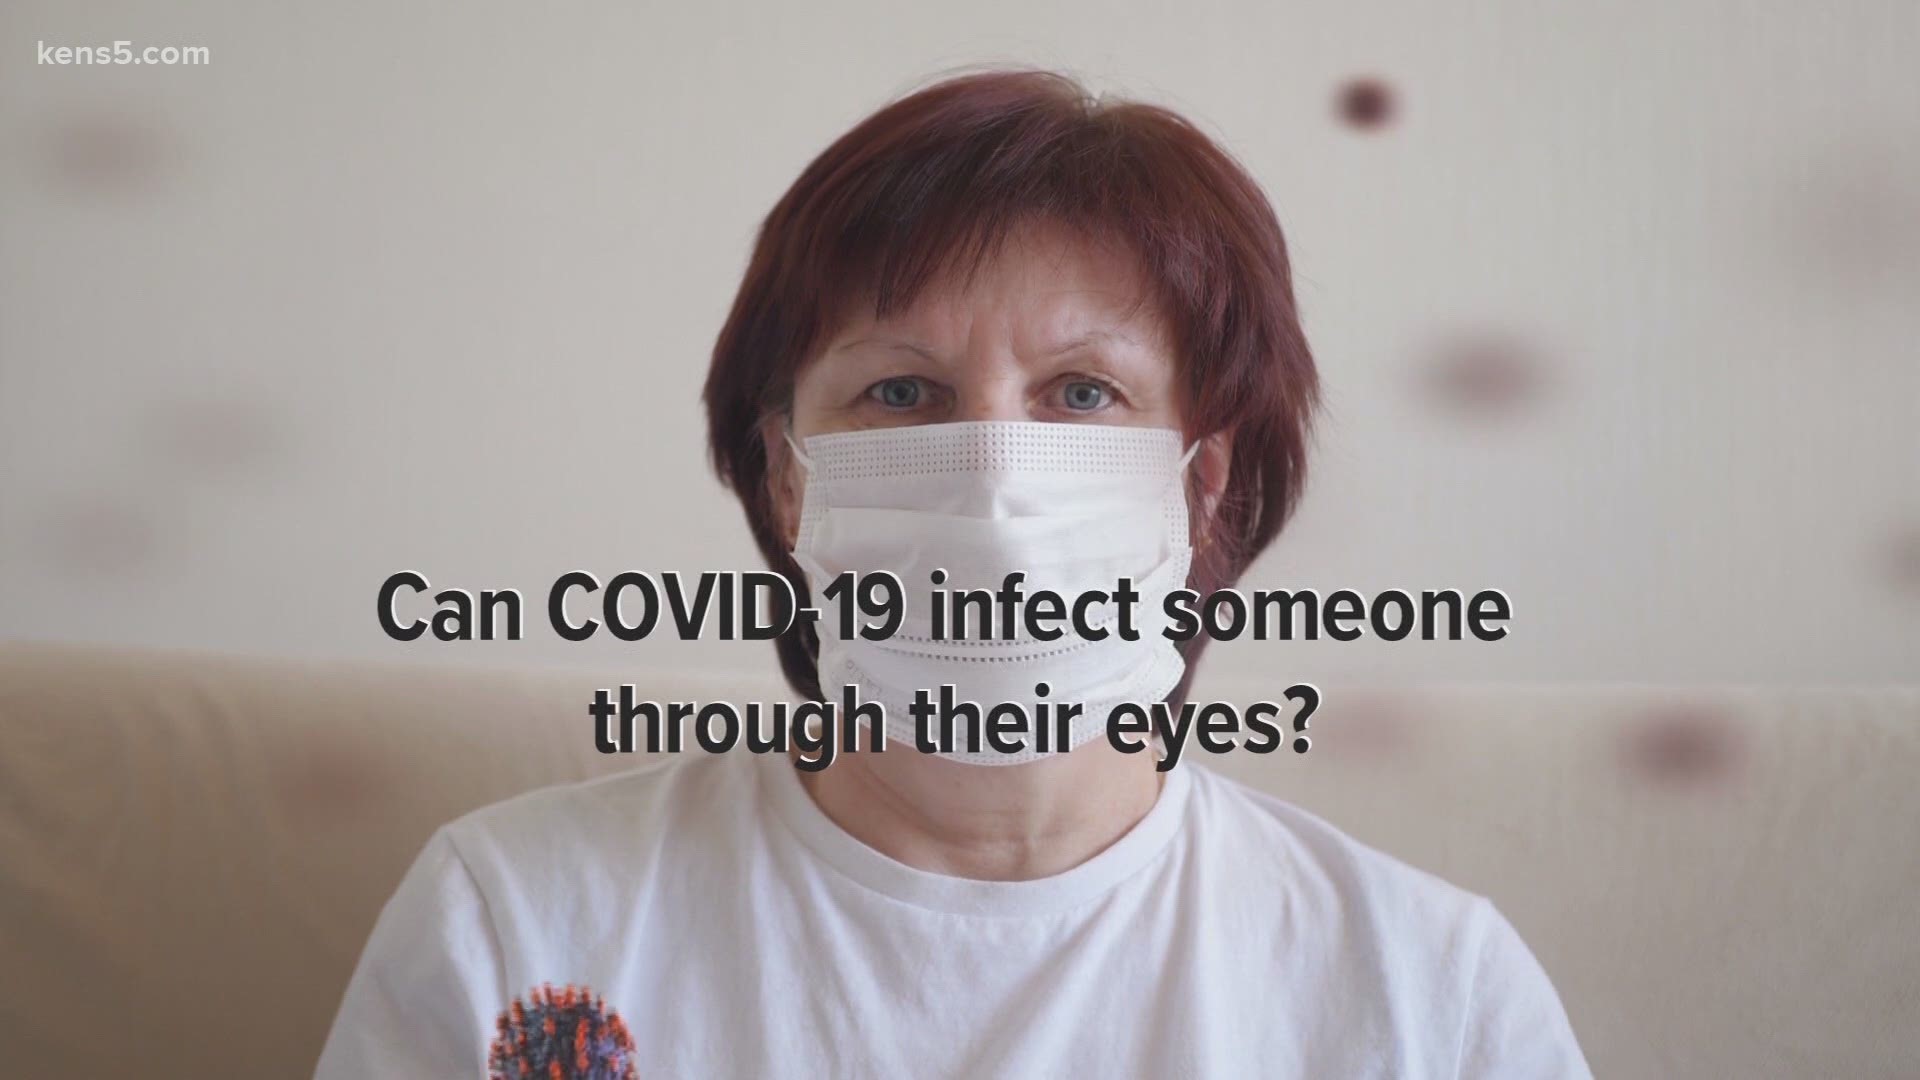 The coronavirus can spread in a number of ways, but some people are wondering if it can be transmitted through the eyes. We verify.